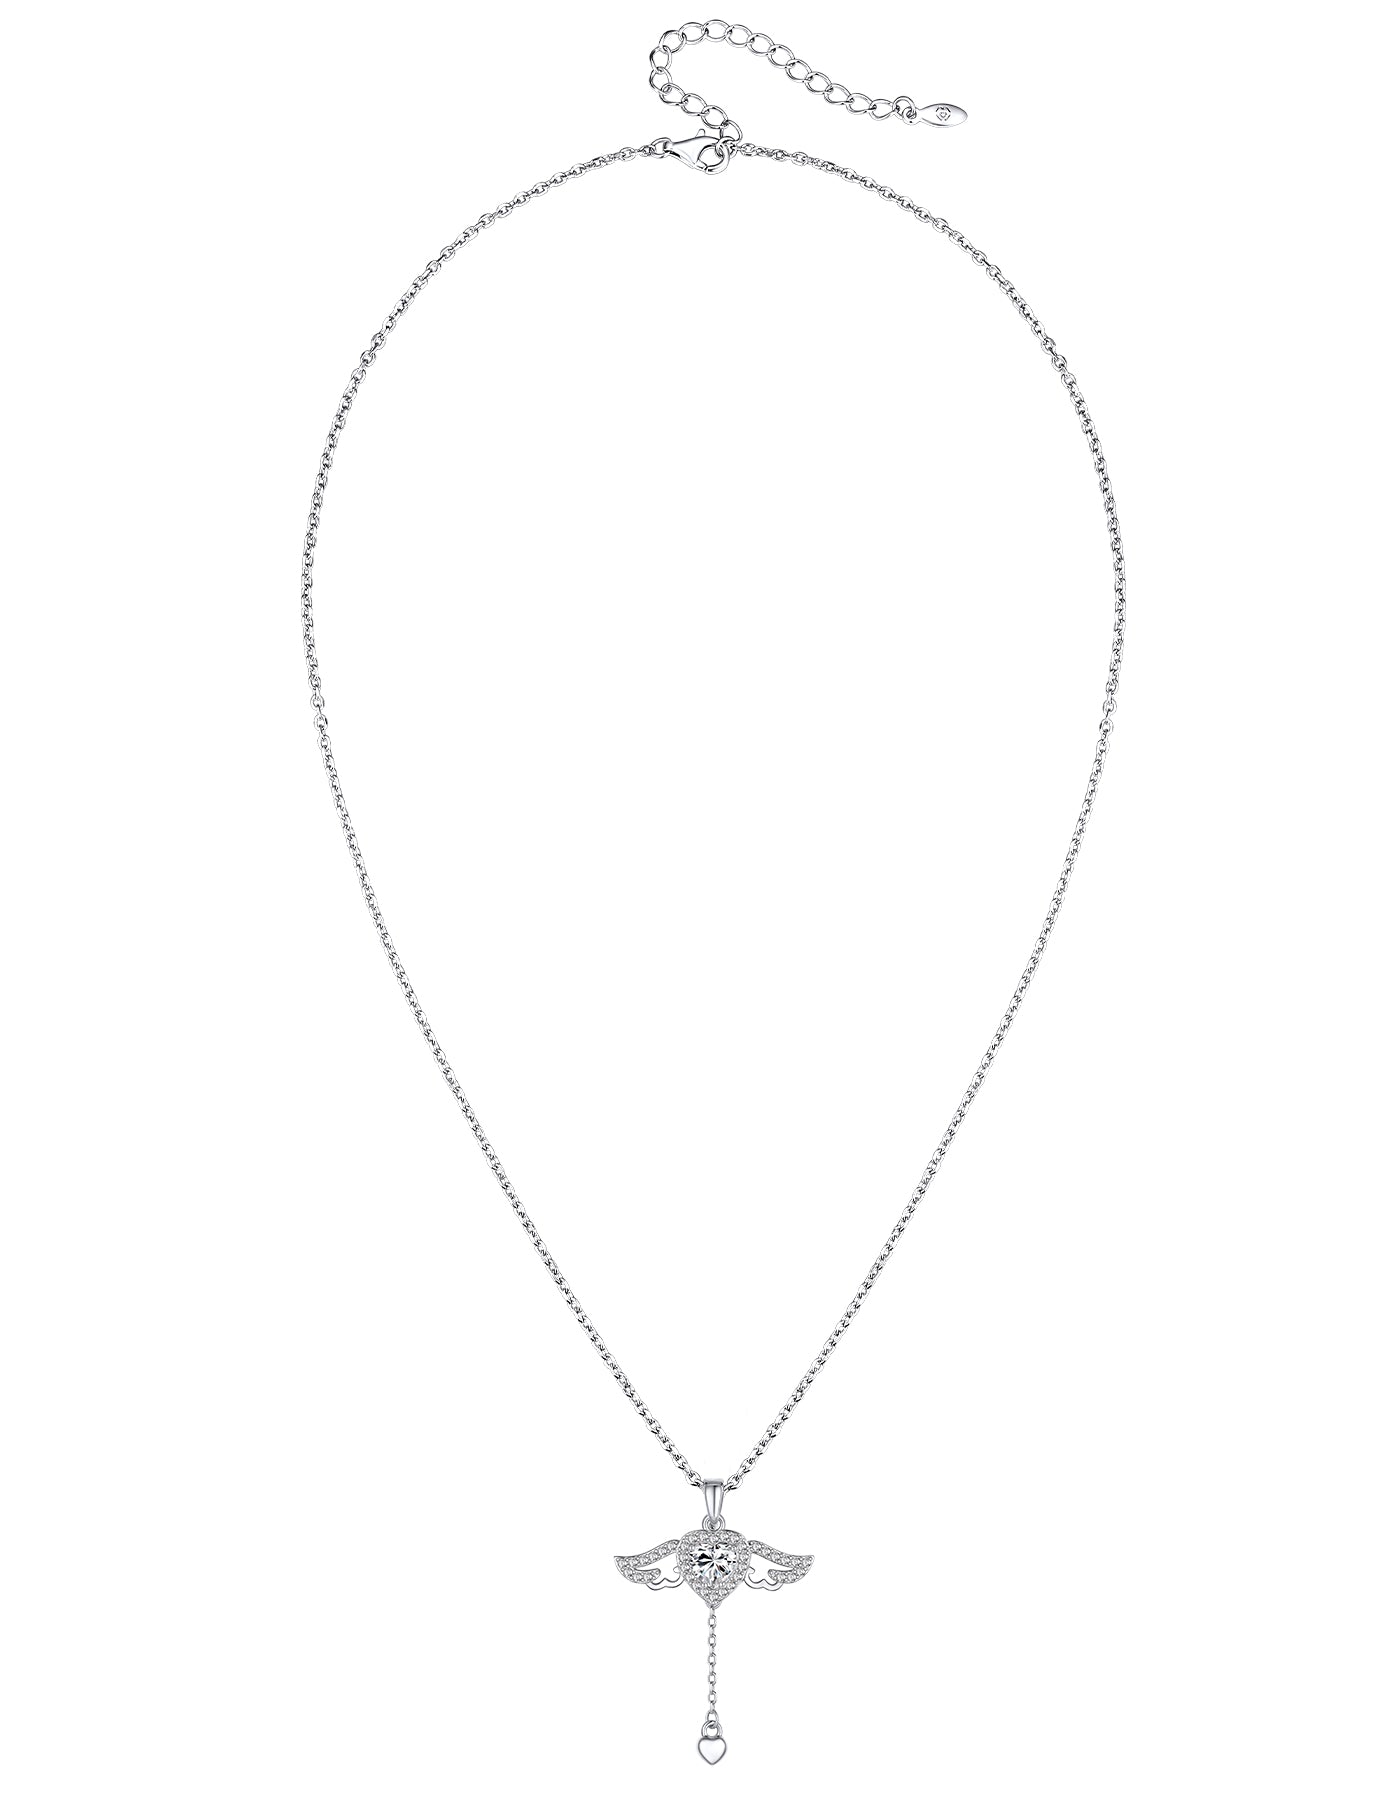 MomentWish Angel Wing Necklace 